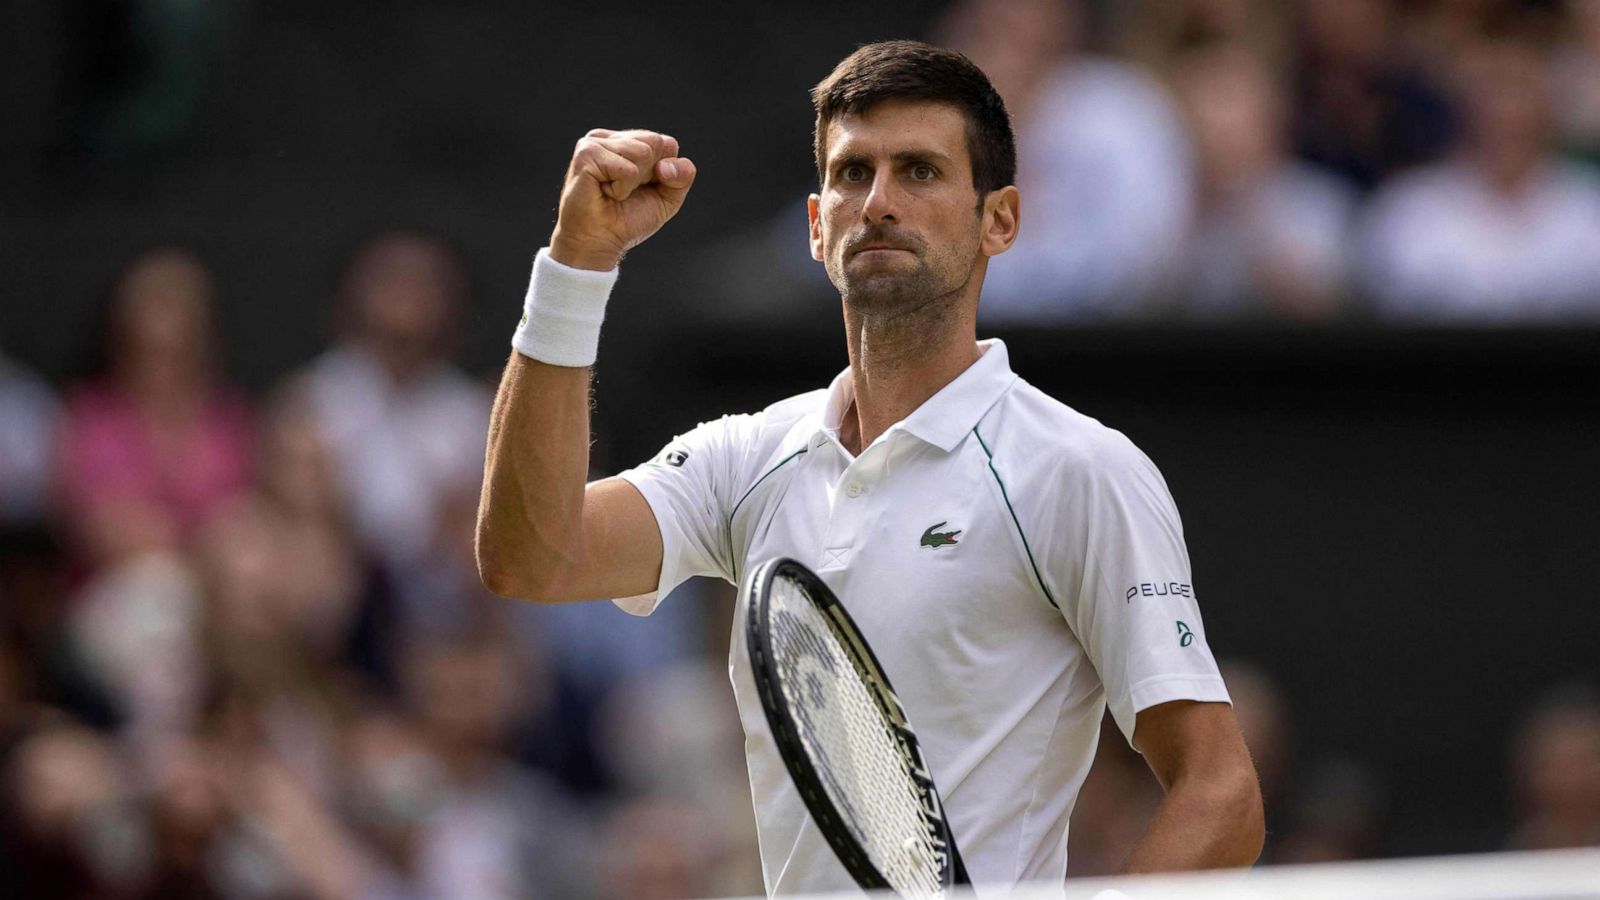 Sports expert Q&A on what Djokovic row means for unvaccinated elite athletes